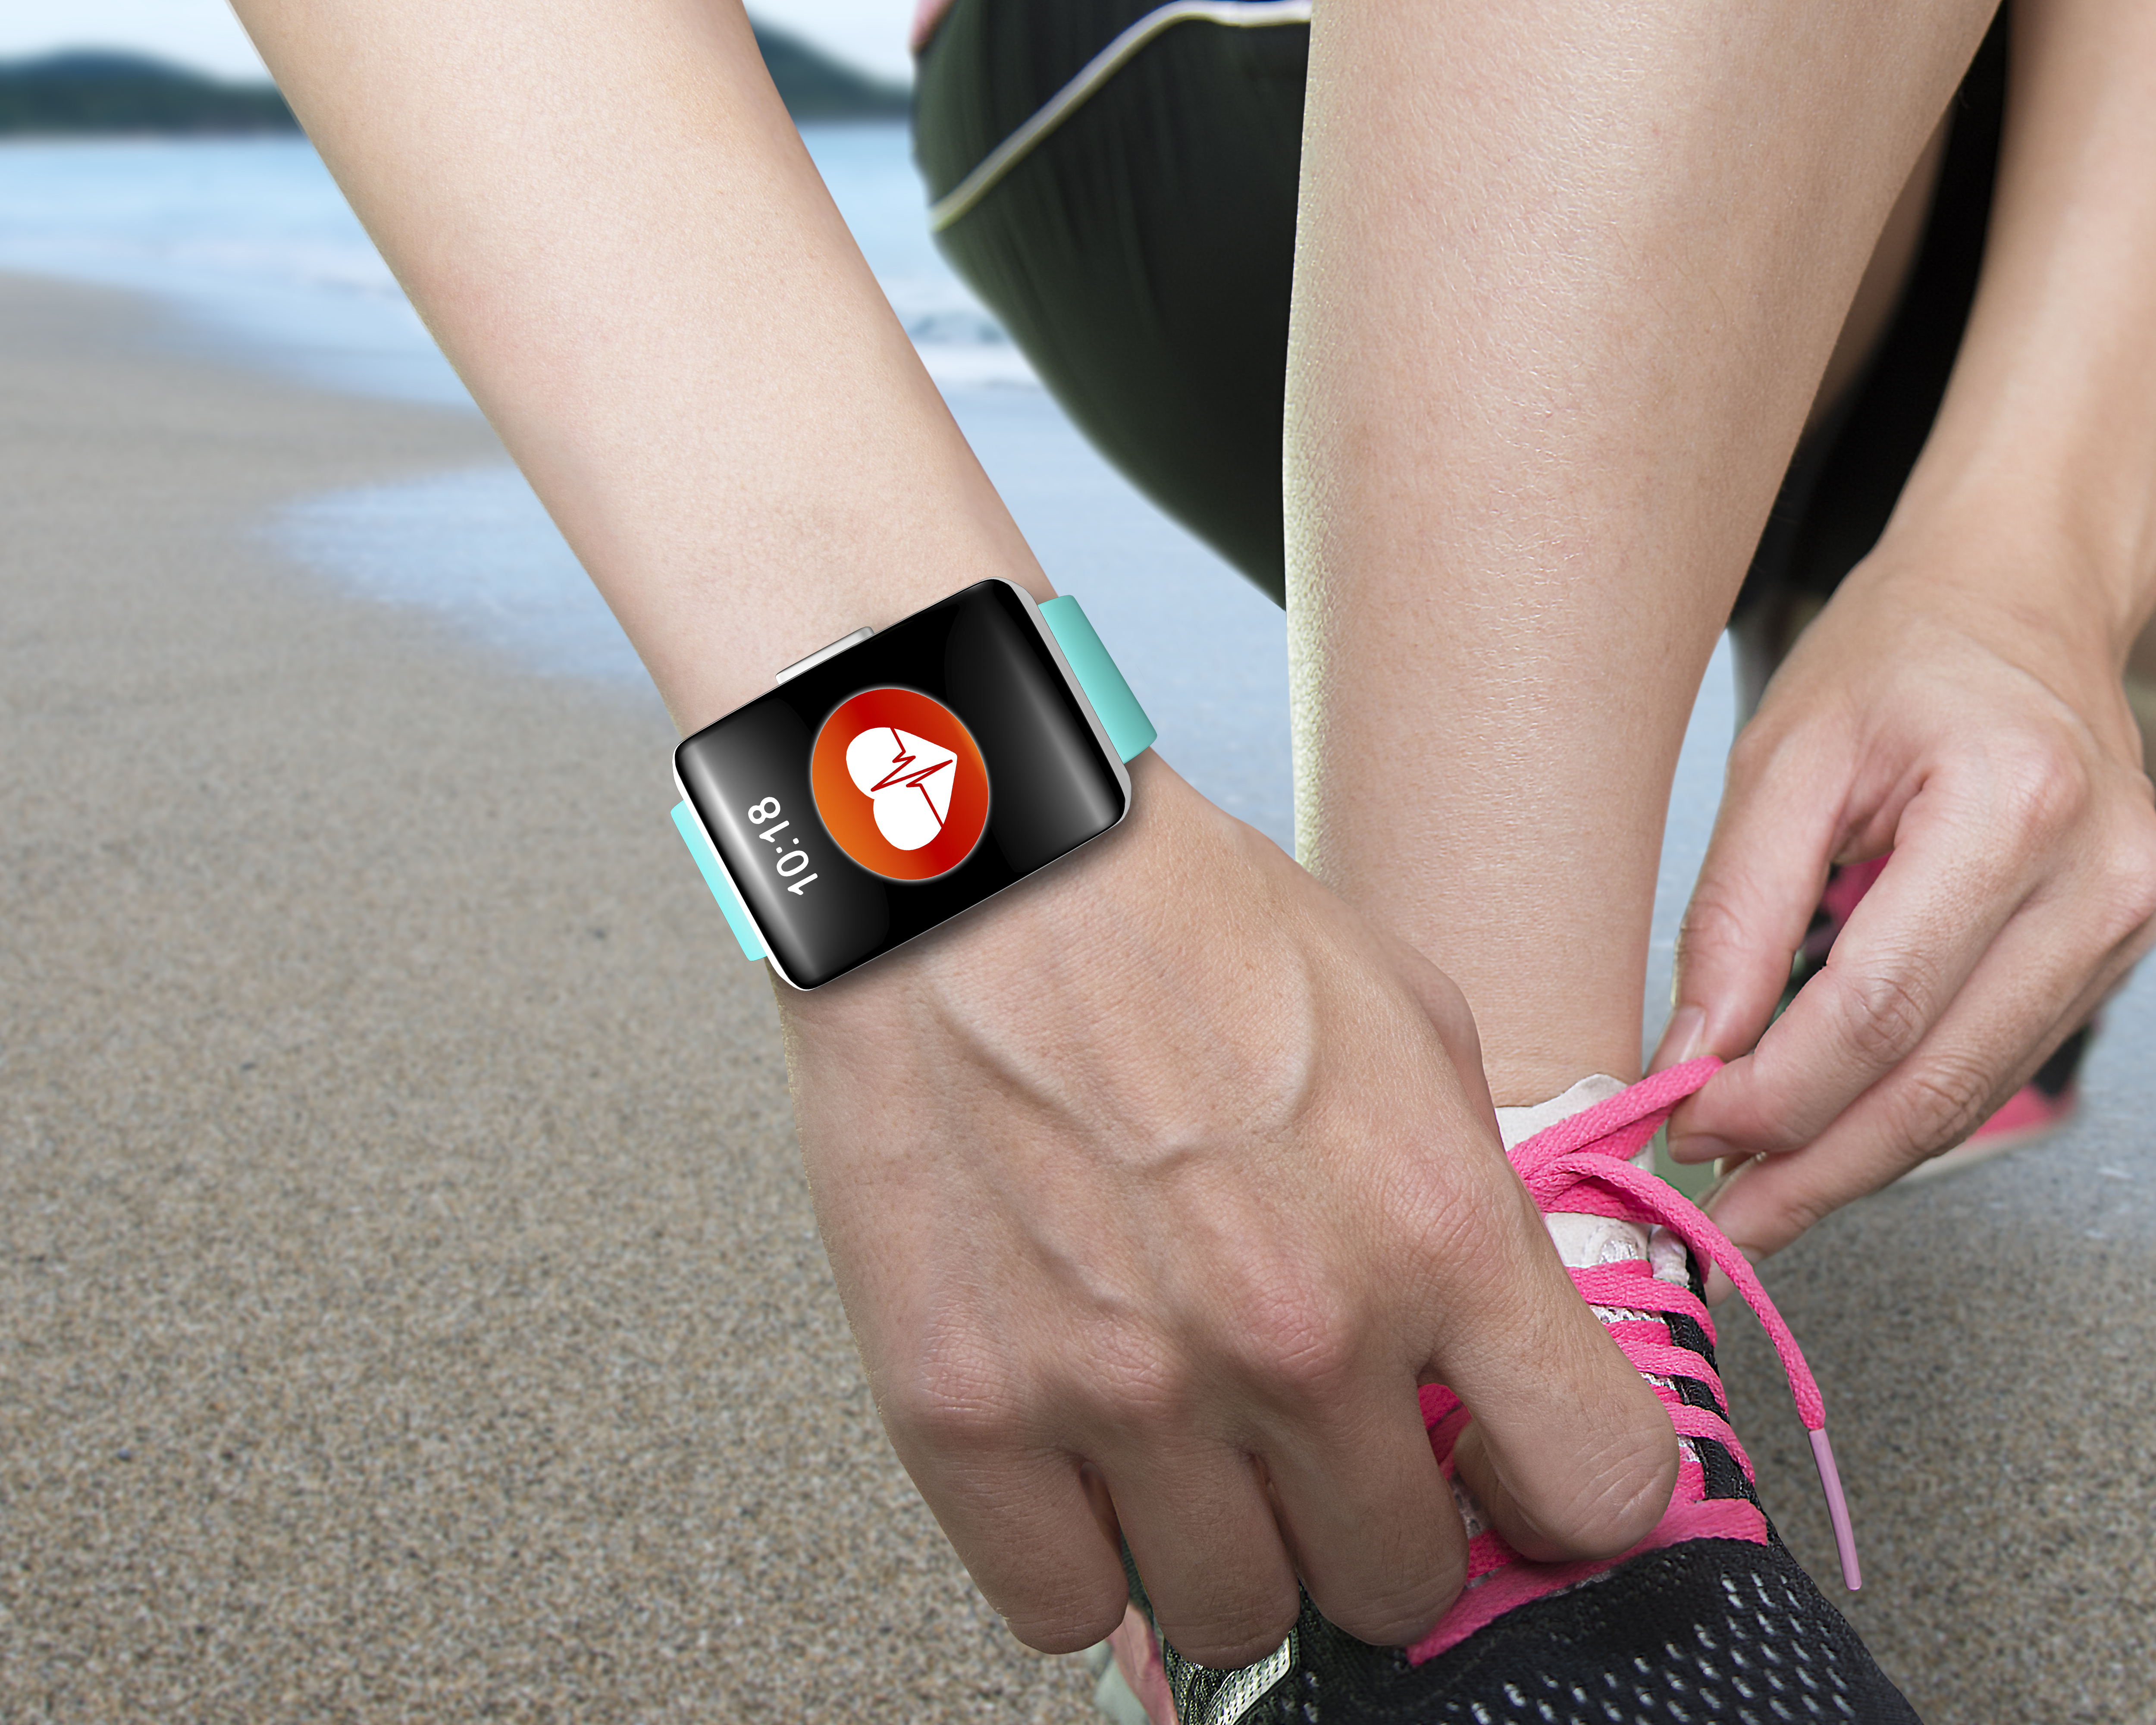 Wearable Fitness Trackers Can Affect Cardiac Devices, Study Finds